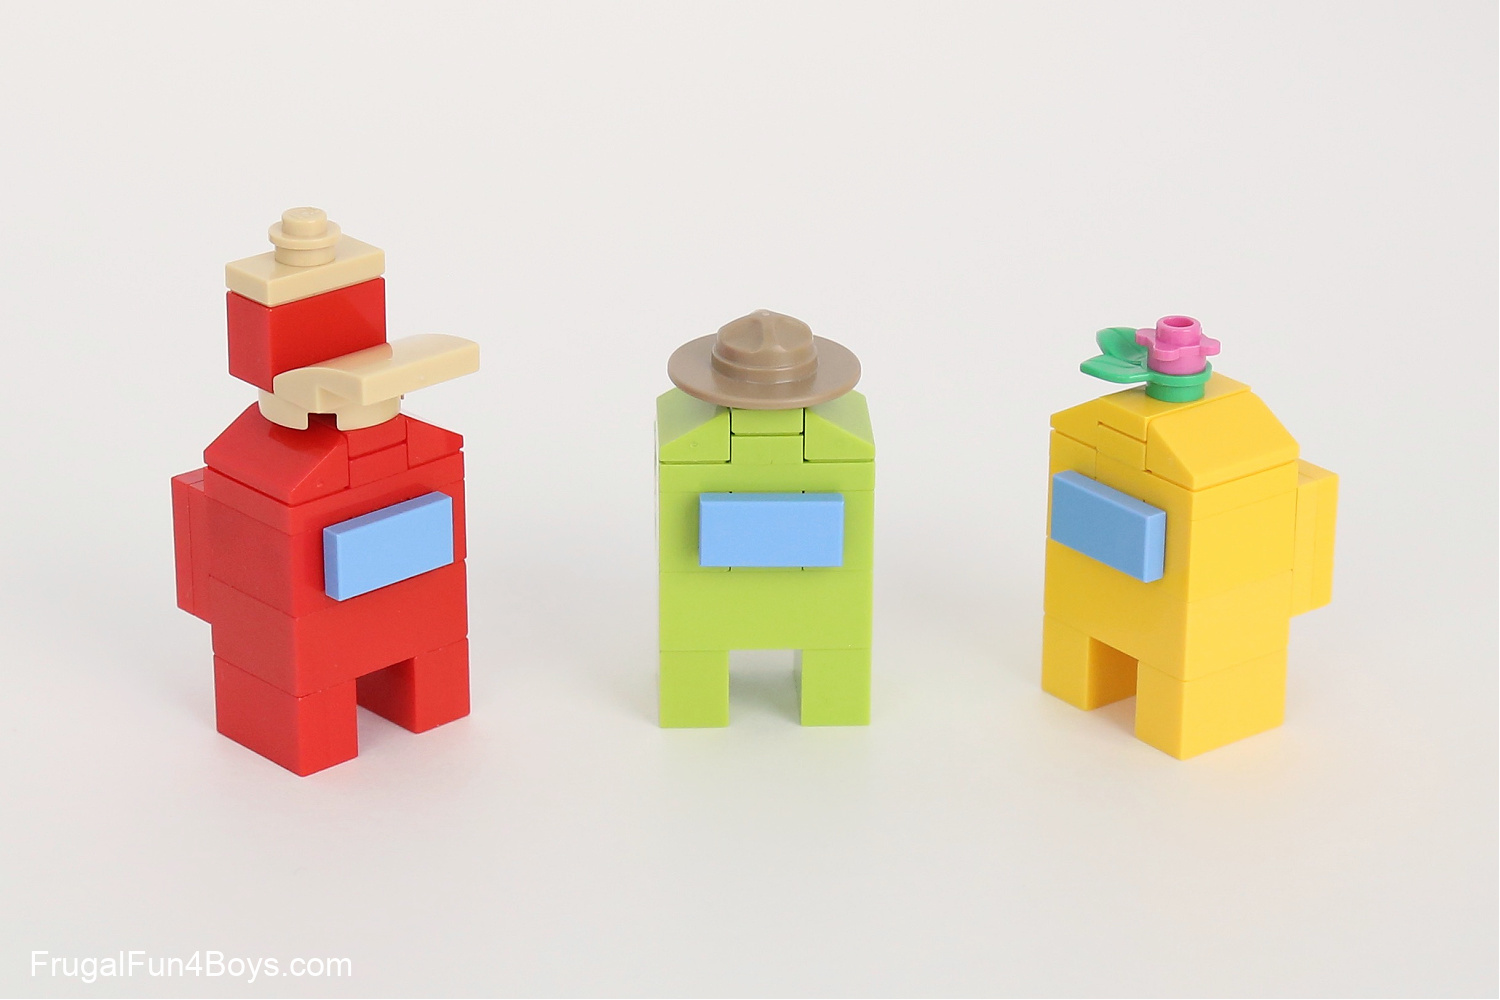 Among Us LEGO Building Challenge - Frugal Fun For Boys and Girls